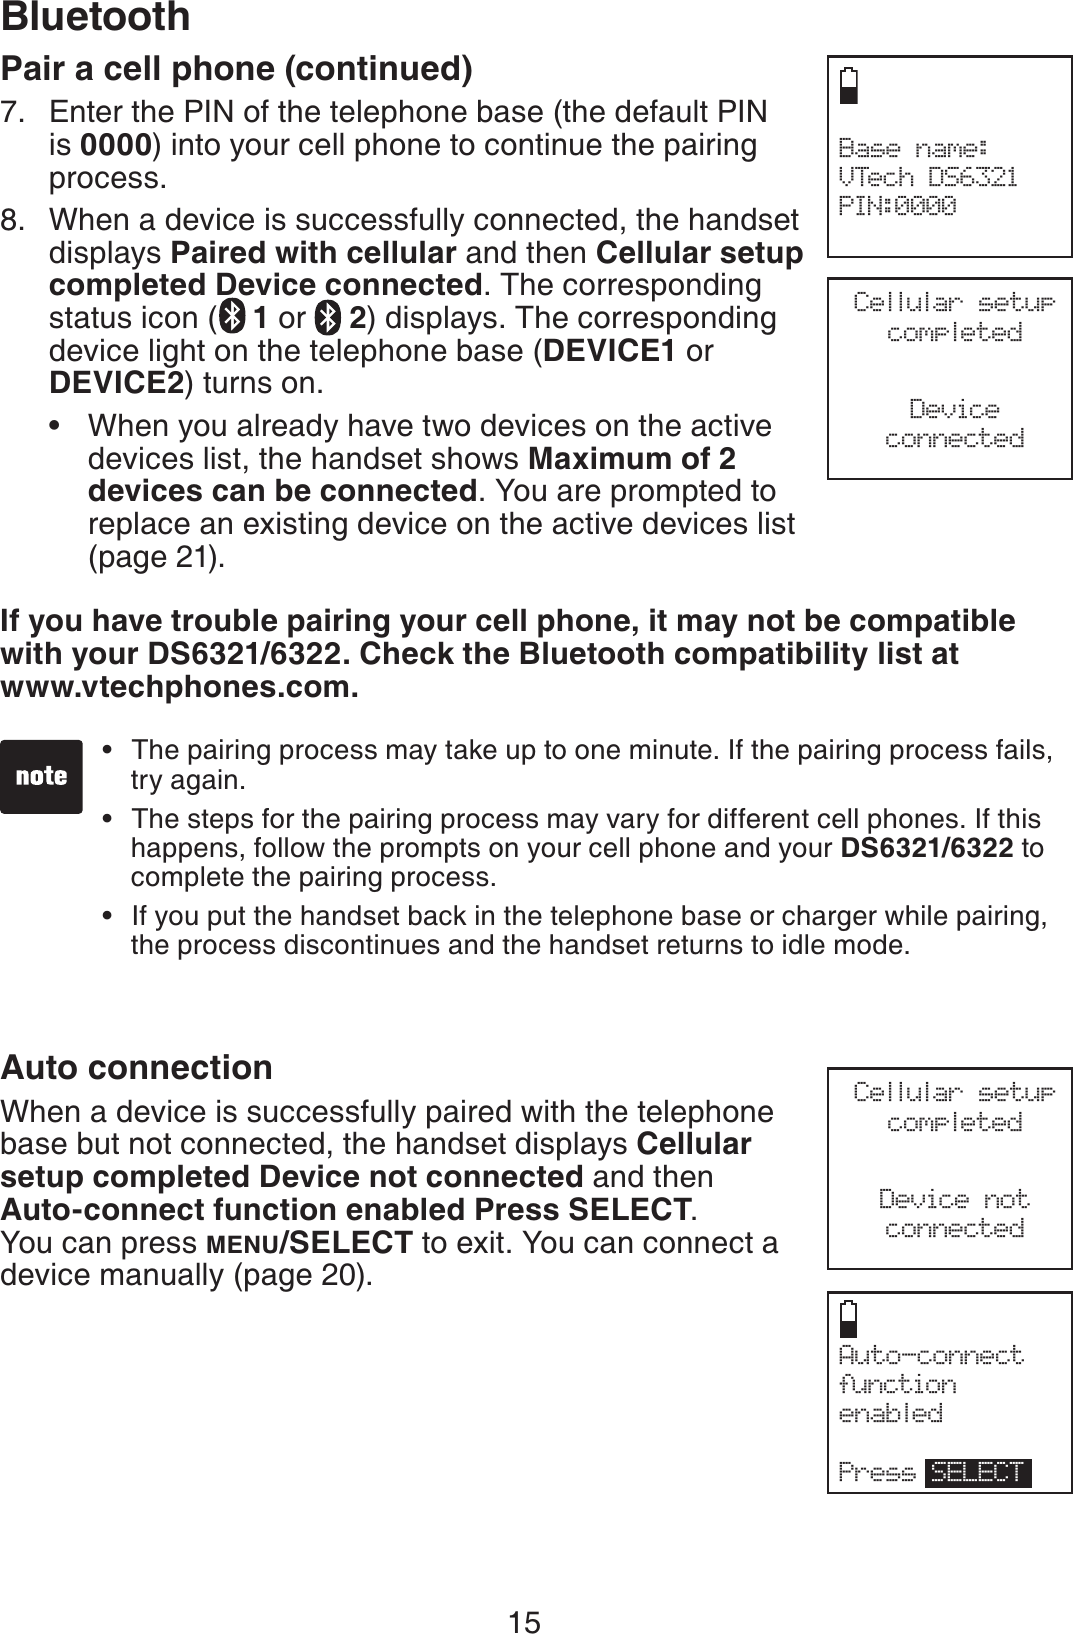 15BluetoothCellular setup completedDeviceconnectedPair a cell phone (continued)Enter the PIN of the telephone base (the default PIN is 0000) into your cell phone to continue the pairing process.When a device is successfully connected, the handset displays Paired with cellular and then Cellular setup completed Device connected. The corresponding status icon ( 1or  2) displays. The corresponding device light on the telephone base (DEVICE1 or DEVICE2) turns on. When you already have two devices on the active devices list, the handset shows Maximum of 2 devices can be connected. You are prompted to replace an existing device on the active devices list (page 21).If you have trouble pairing your cell phone, it may not be compatible with your DS6321/6322. Check the Bluetooth compatibility list at www.vtechphones.com.Auto connectionWhen a device is successfully paired with the telephone base but not connected, the handset displays Cellular setup completed Device not connected and then Auto-connect function enabled Press SELECT.You can press MENU/SELECT to exit. You can connect a device manually (page 20).7.8.•The pairing process may take up to one minute. If the pairing process fails, try again.The steps for the pairing process may vary for different cell phones. If this happens, follow the prompts on your cell phone and your DS6321/6322 to complete the pairing process. If you put the handset back in the telephone base or charger while pairing, the process discontinues and the handset returns to idle mode.•••Auto-connect function enabledPress SELECTCellular setup completedDevice notconnectedBase name:VTech DS6321PIN:0000